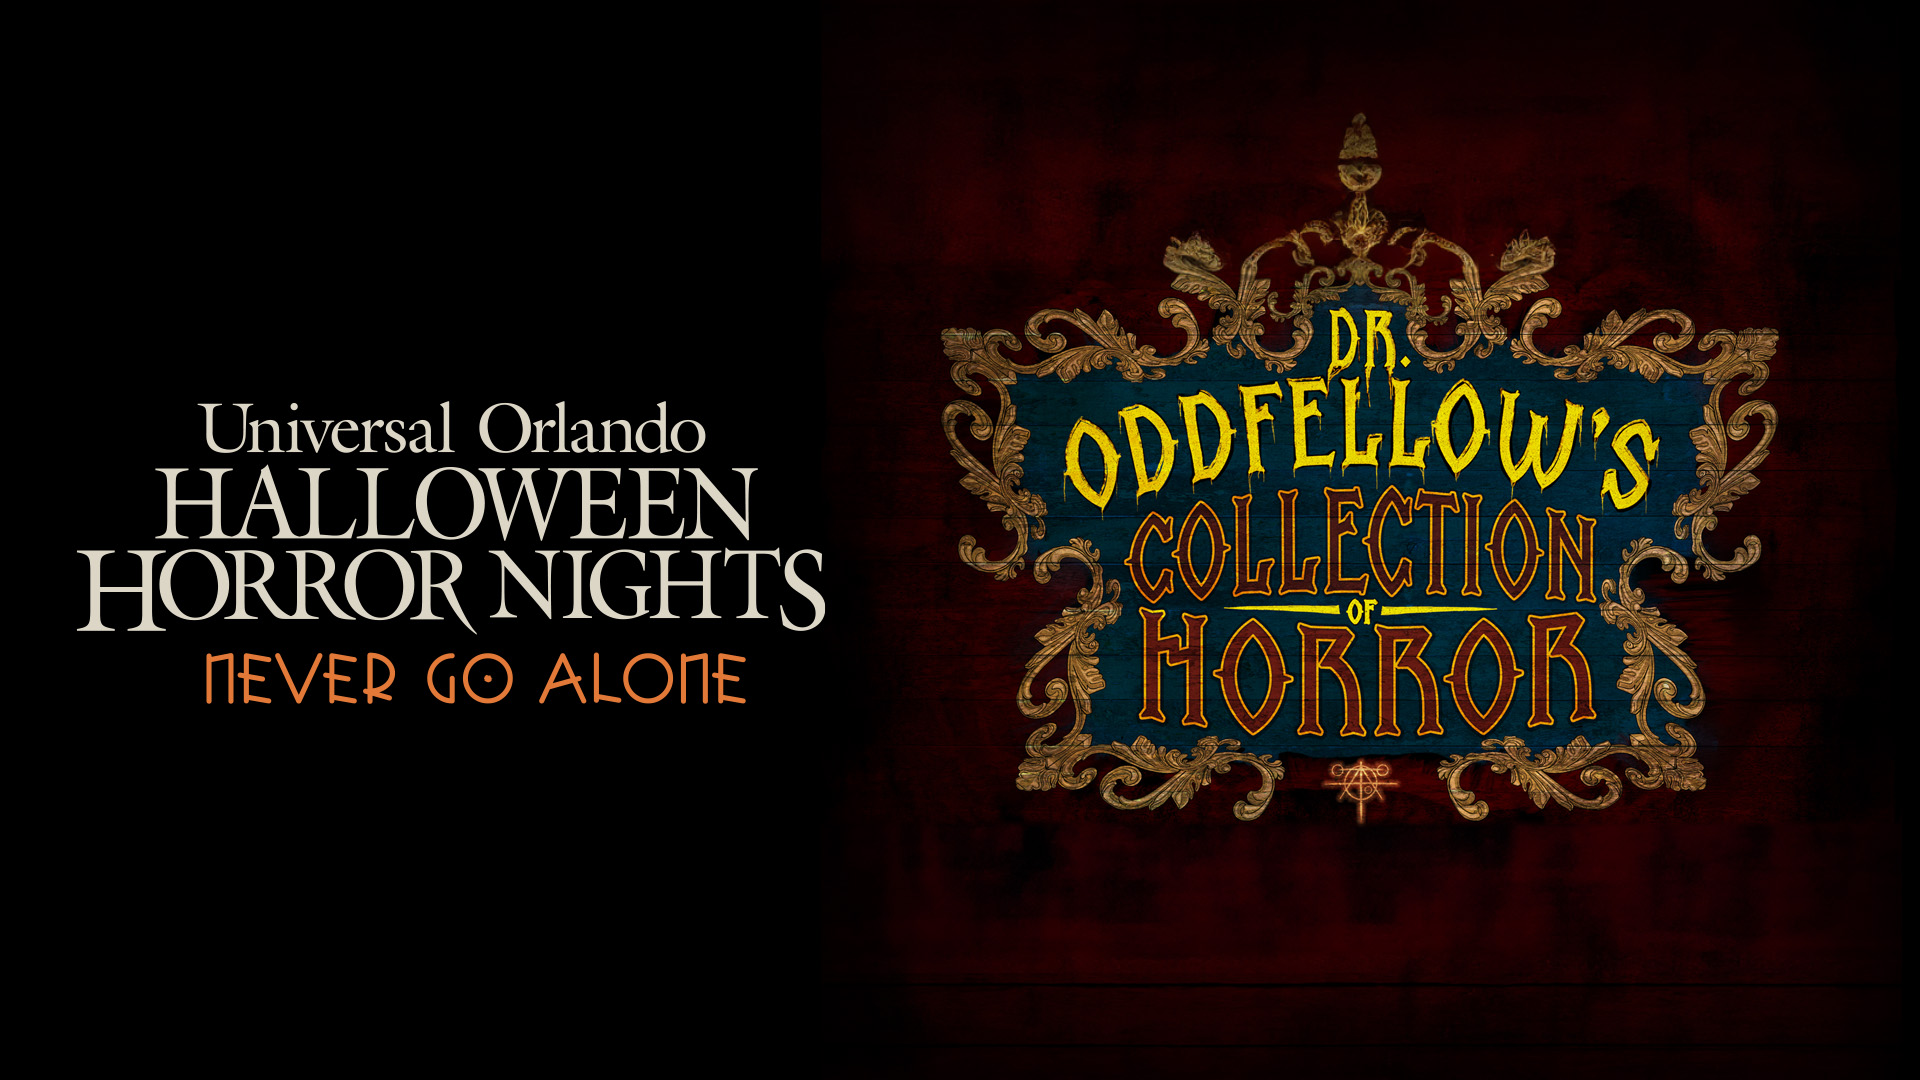 Dr. Oddfellow's Collection of Horror